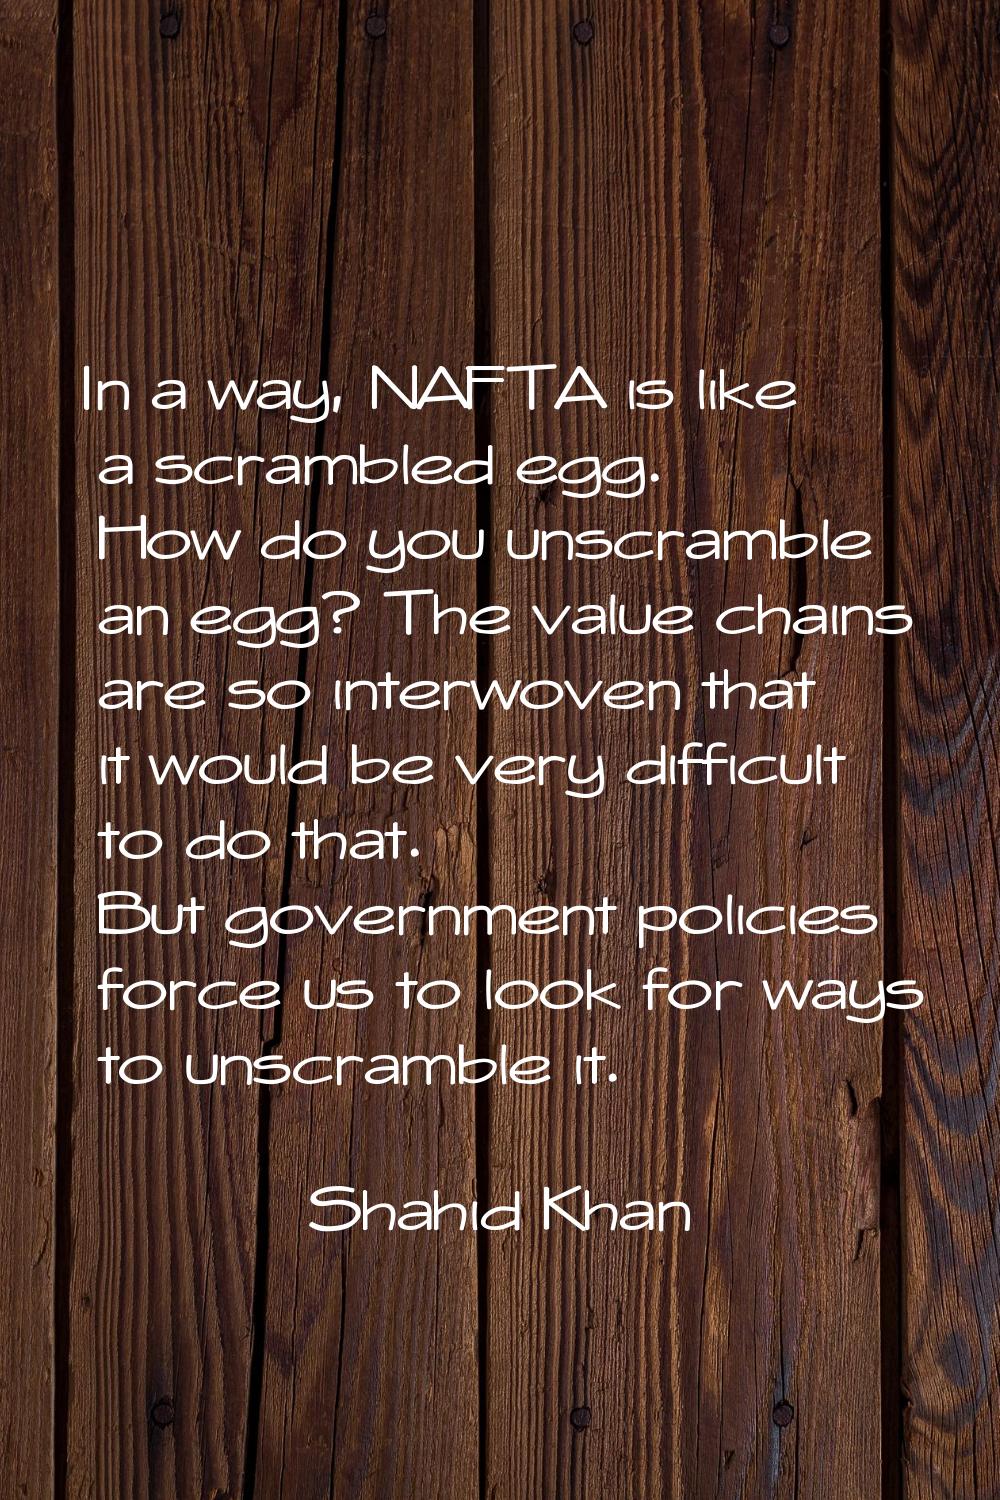 In a way, NAFTA is like a scrambled egg. How do you unscramble an egg? The value chains are so inte